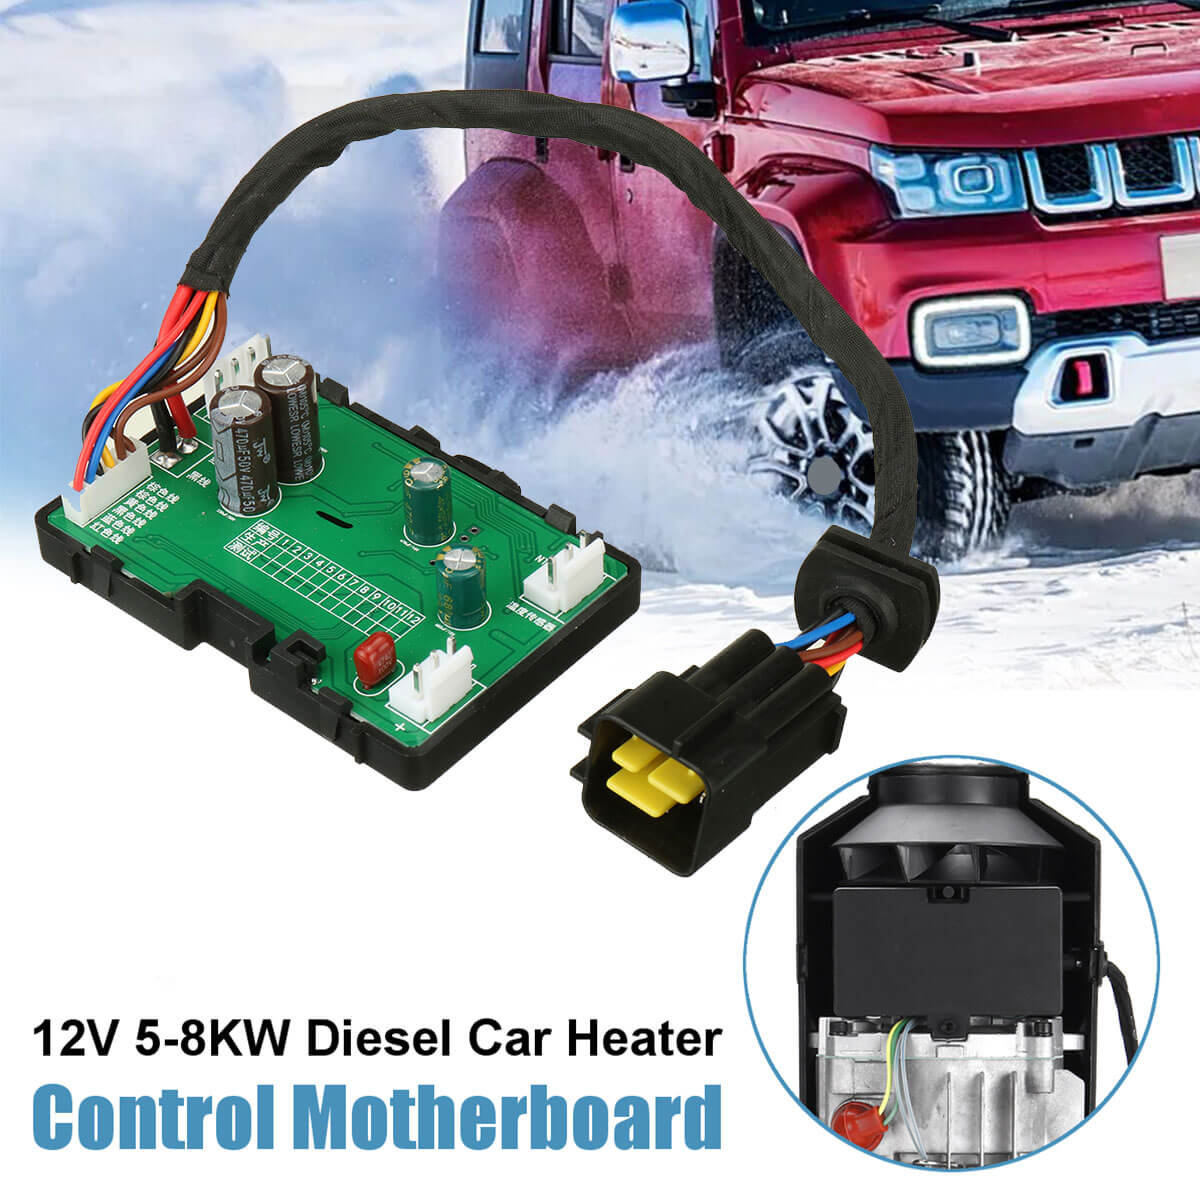 Haclory A22 Diesel Heater Control Motherboard, Mainboard Accessories 12V 24V 5-8KW 